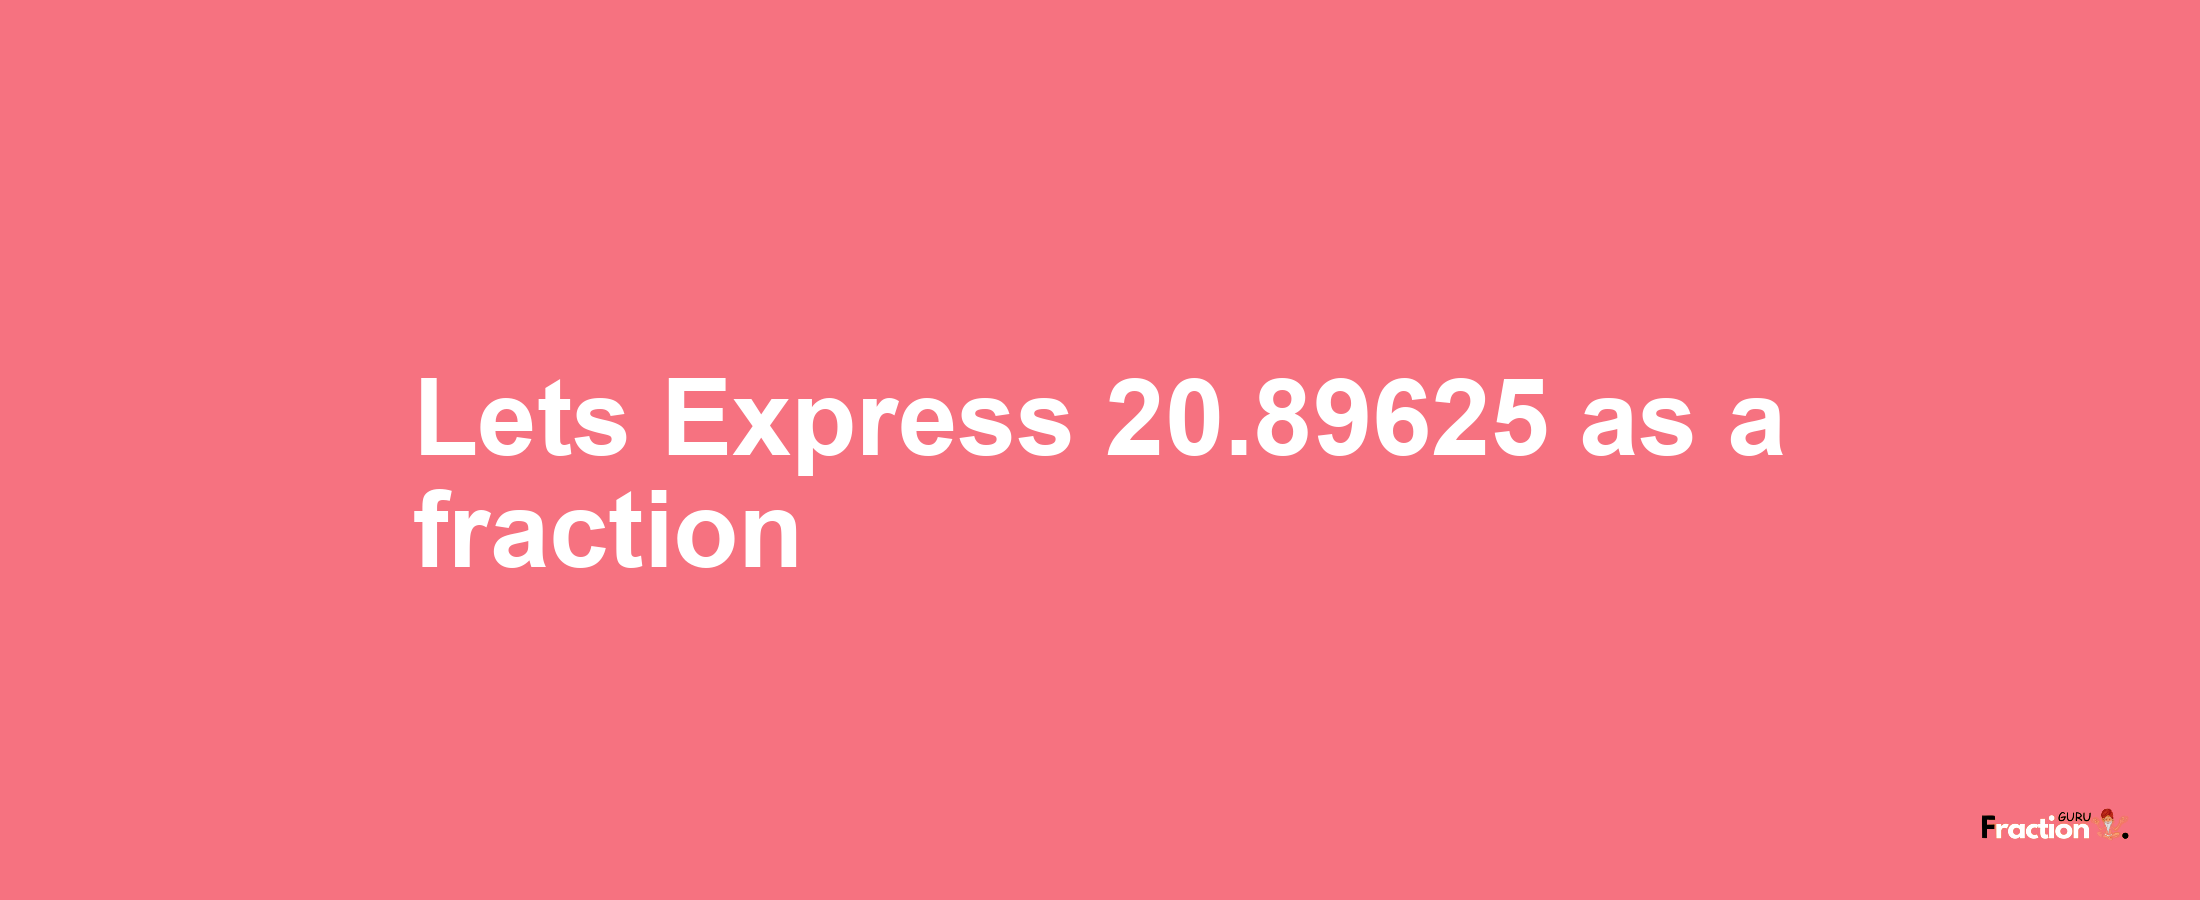 Lets Express 20.89625 as afraction